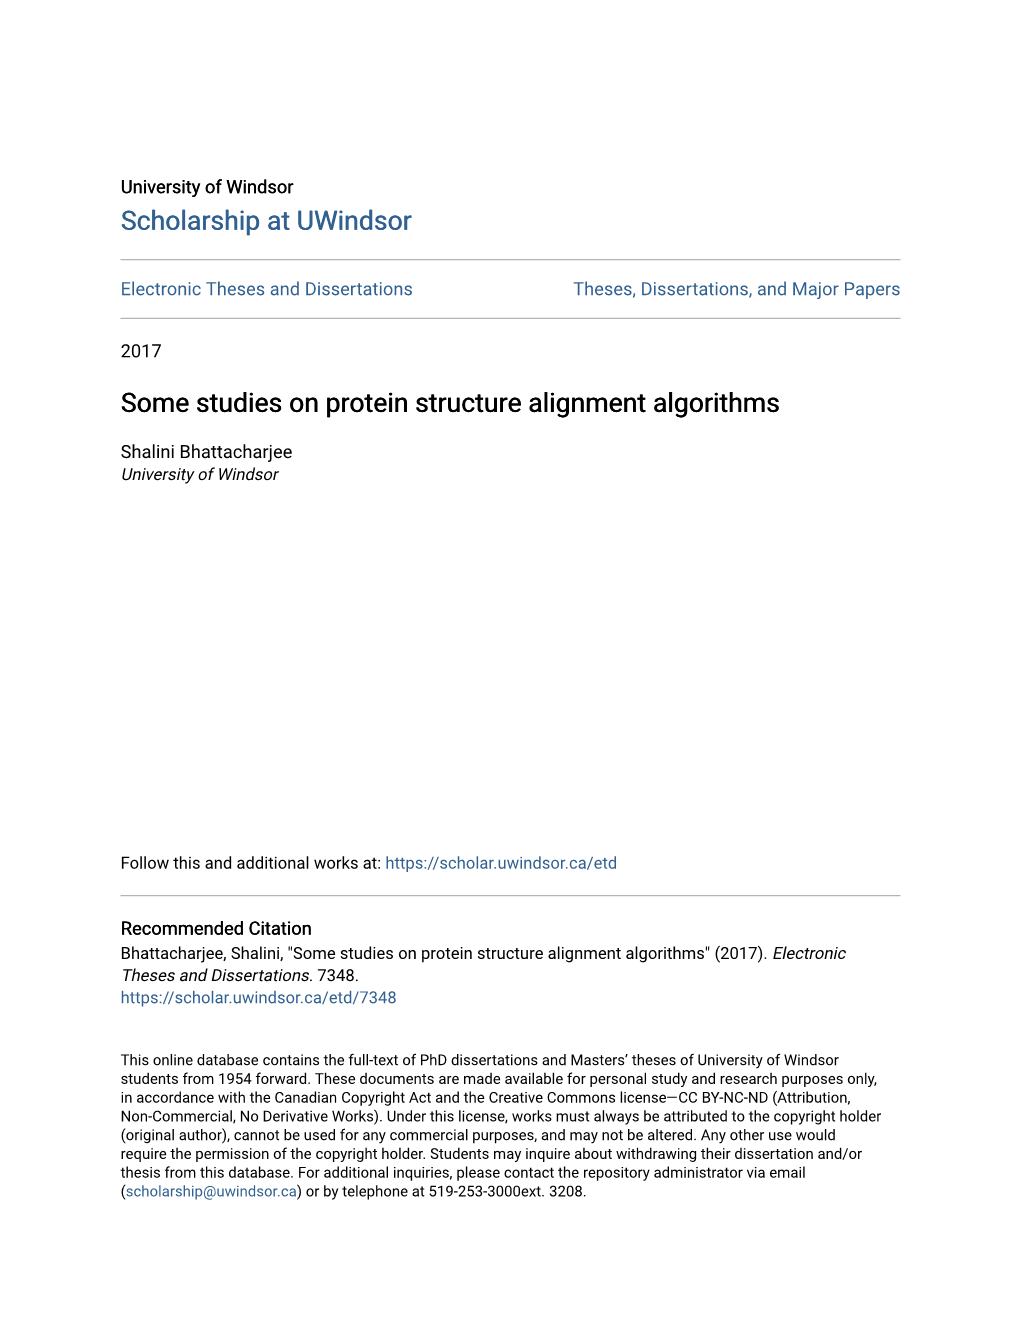 Some Studies on Protein Structure Alignment Algorithms